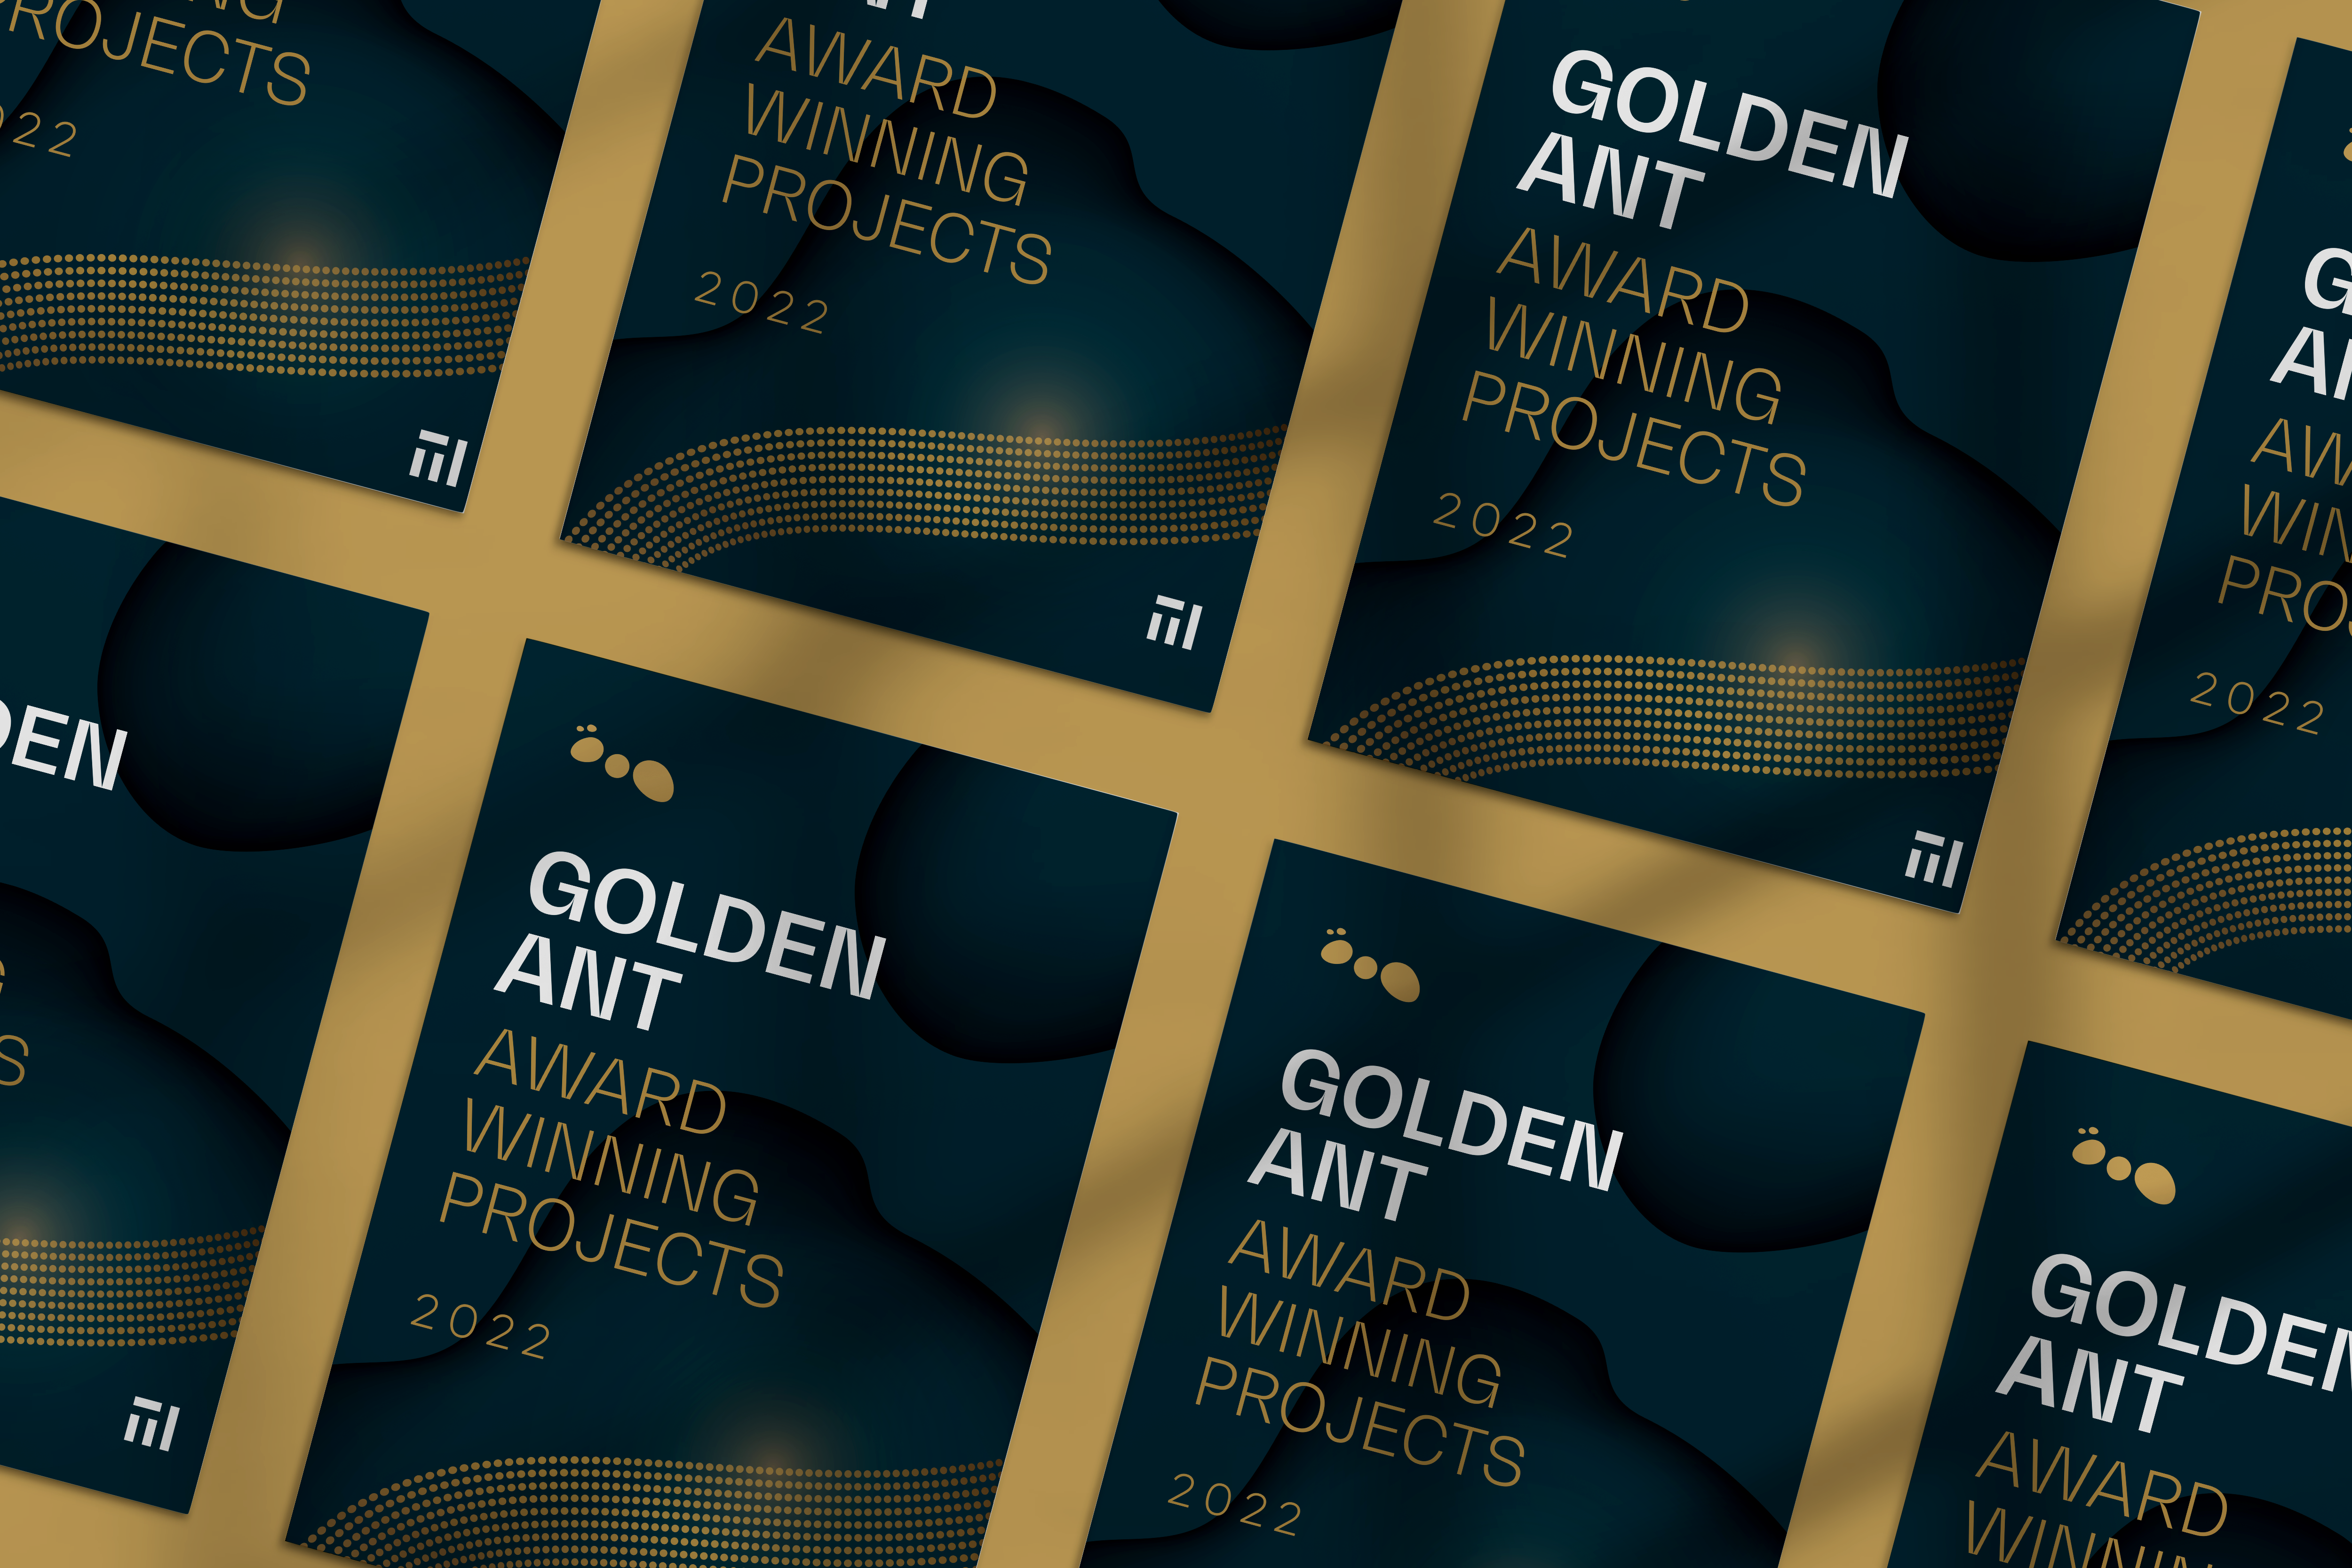 Golden Ant Award Winning Projects 2022 Is Published}